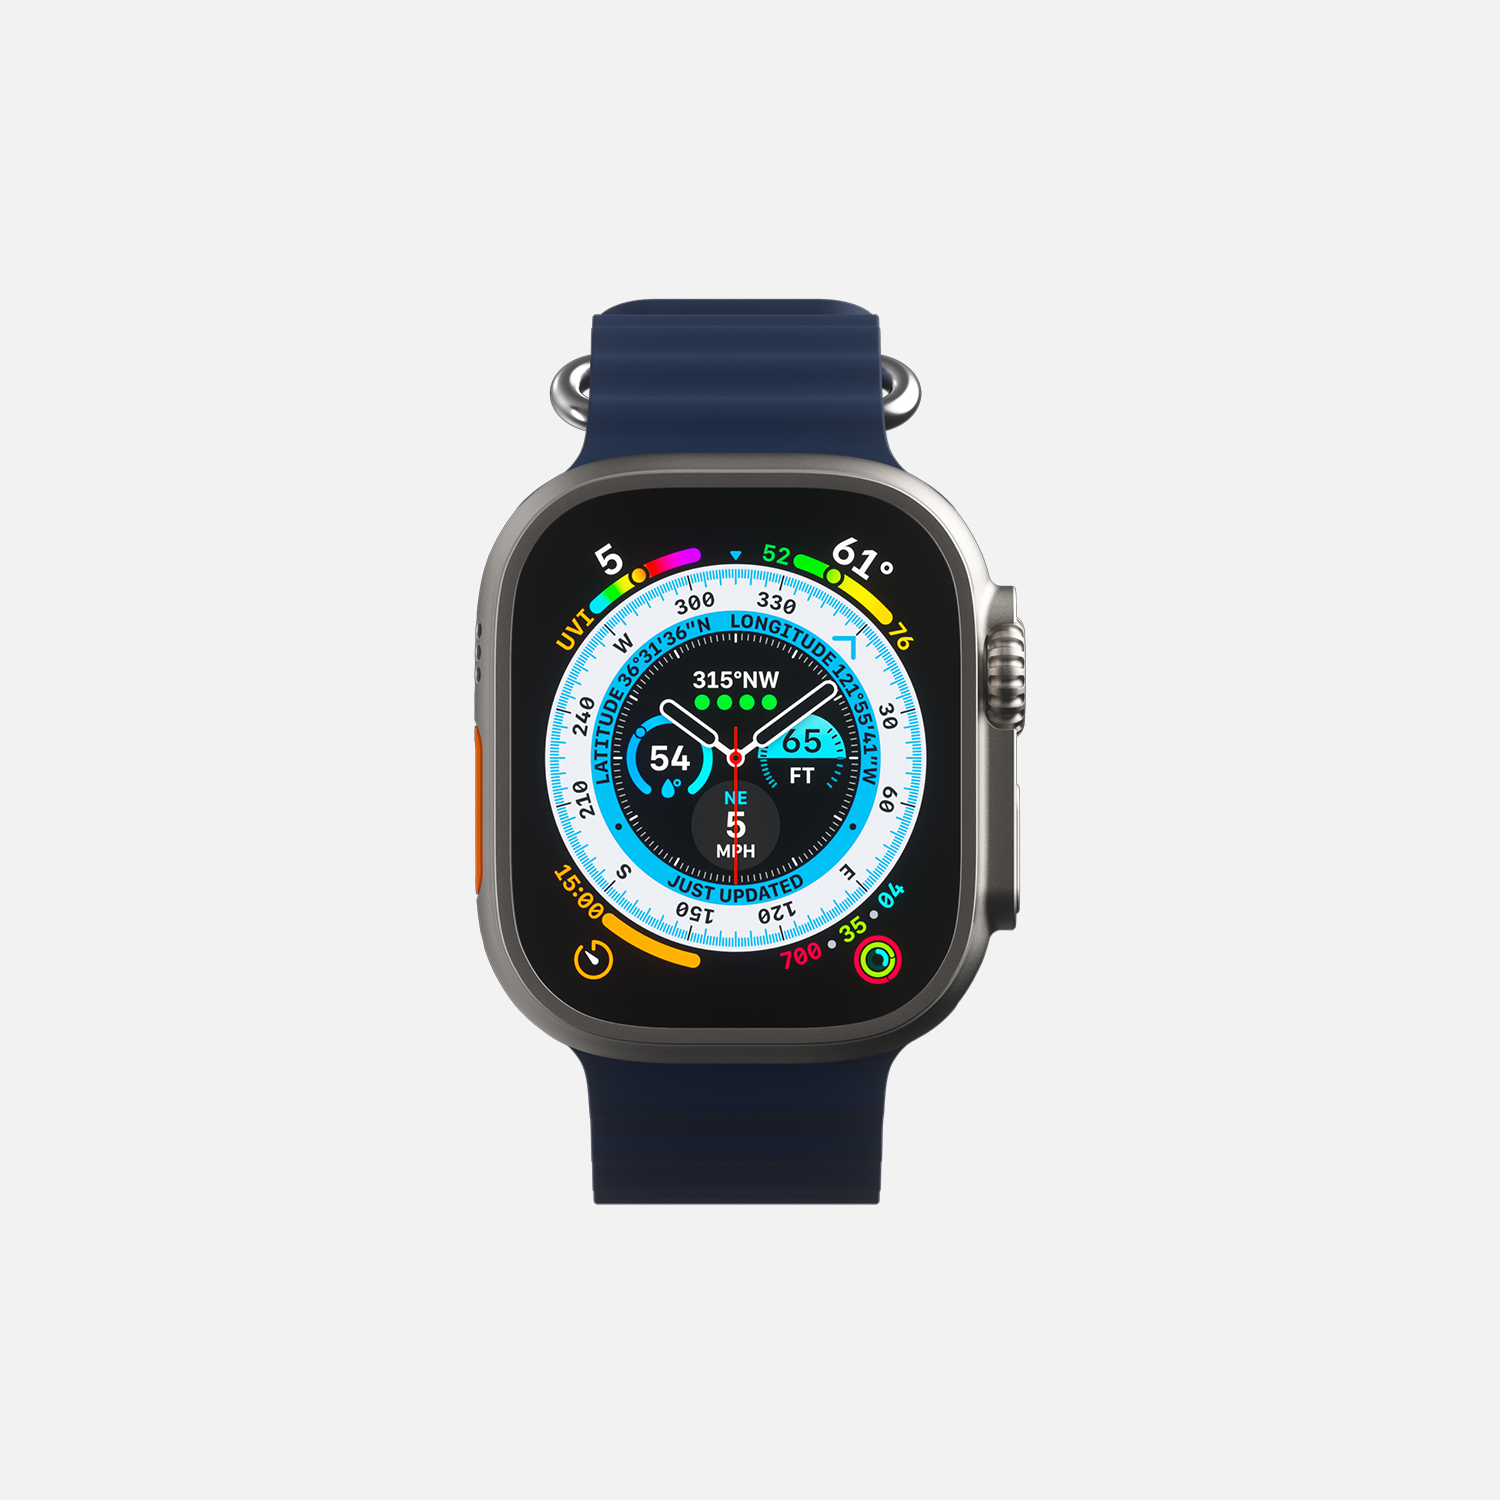 Smartwatch with fitness tracking features and colorful display on white background.